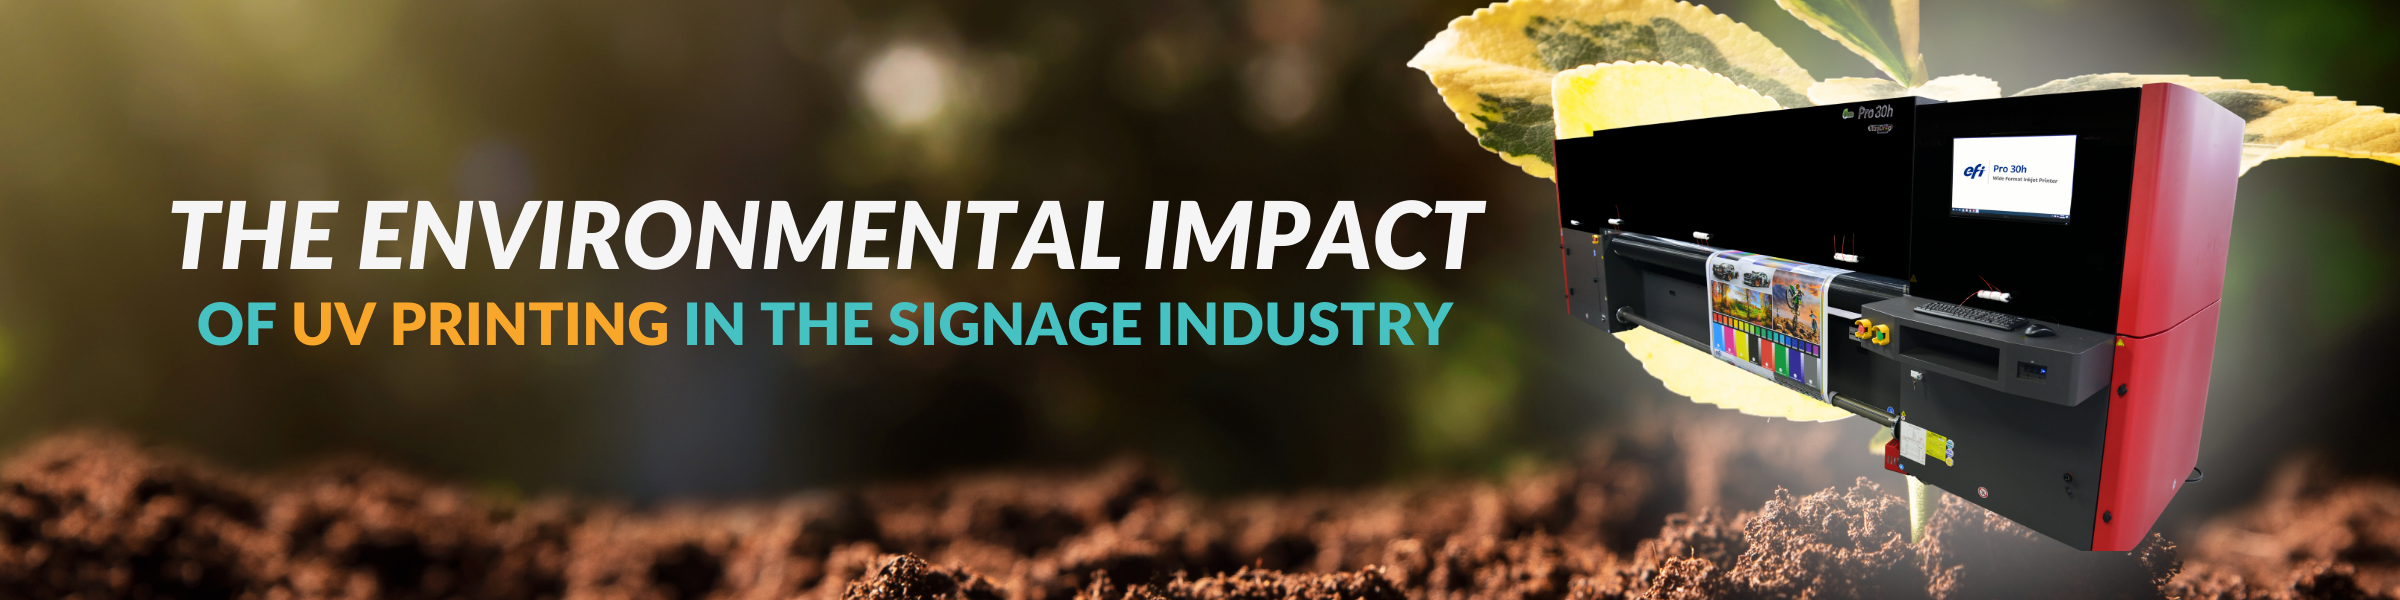 The Environmental Impact of UV Printing in the Signage Industry